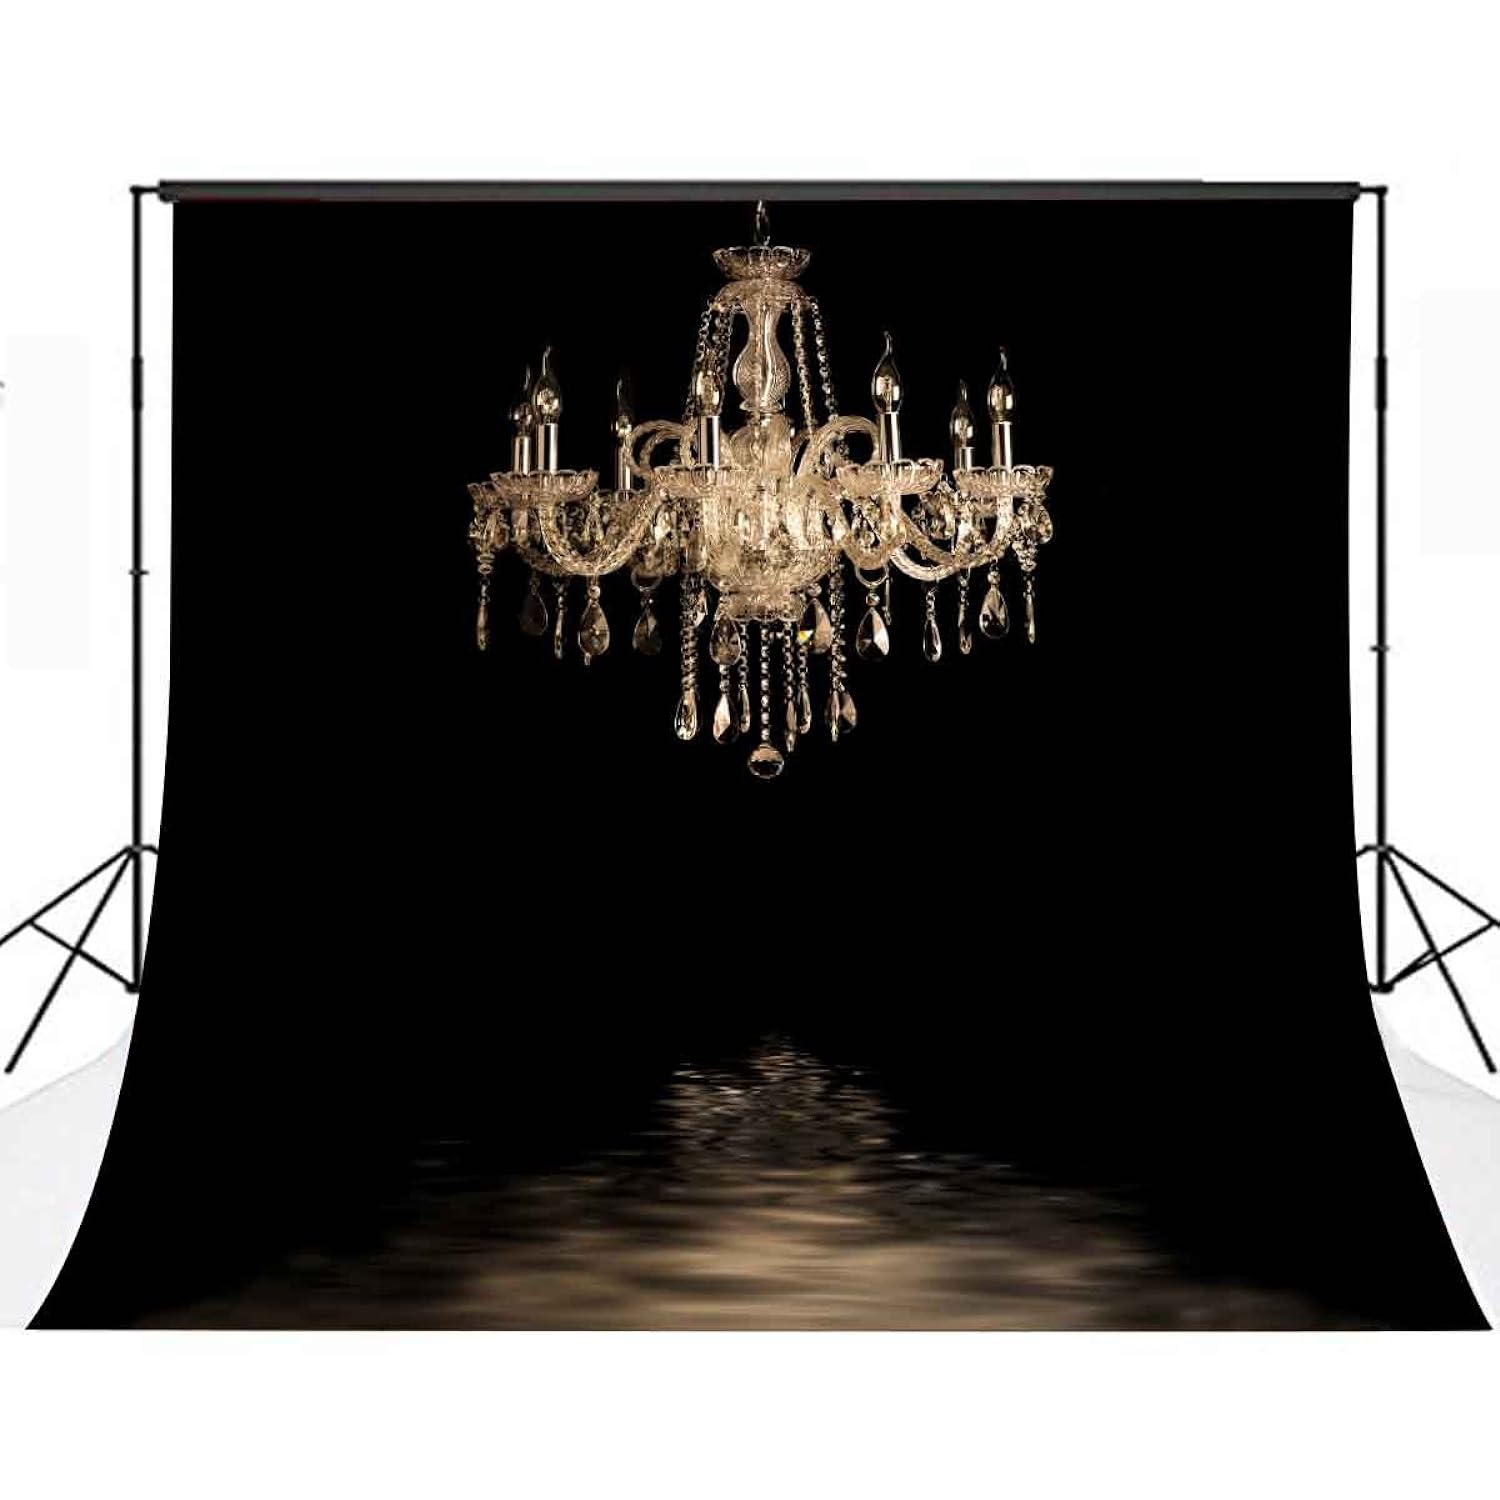 thinkstar 10×10 Ft Chandelier Theme Photography Photography Background Cloth Backdrop Studio Props Photography